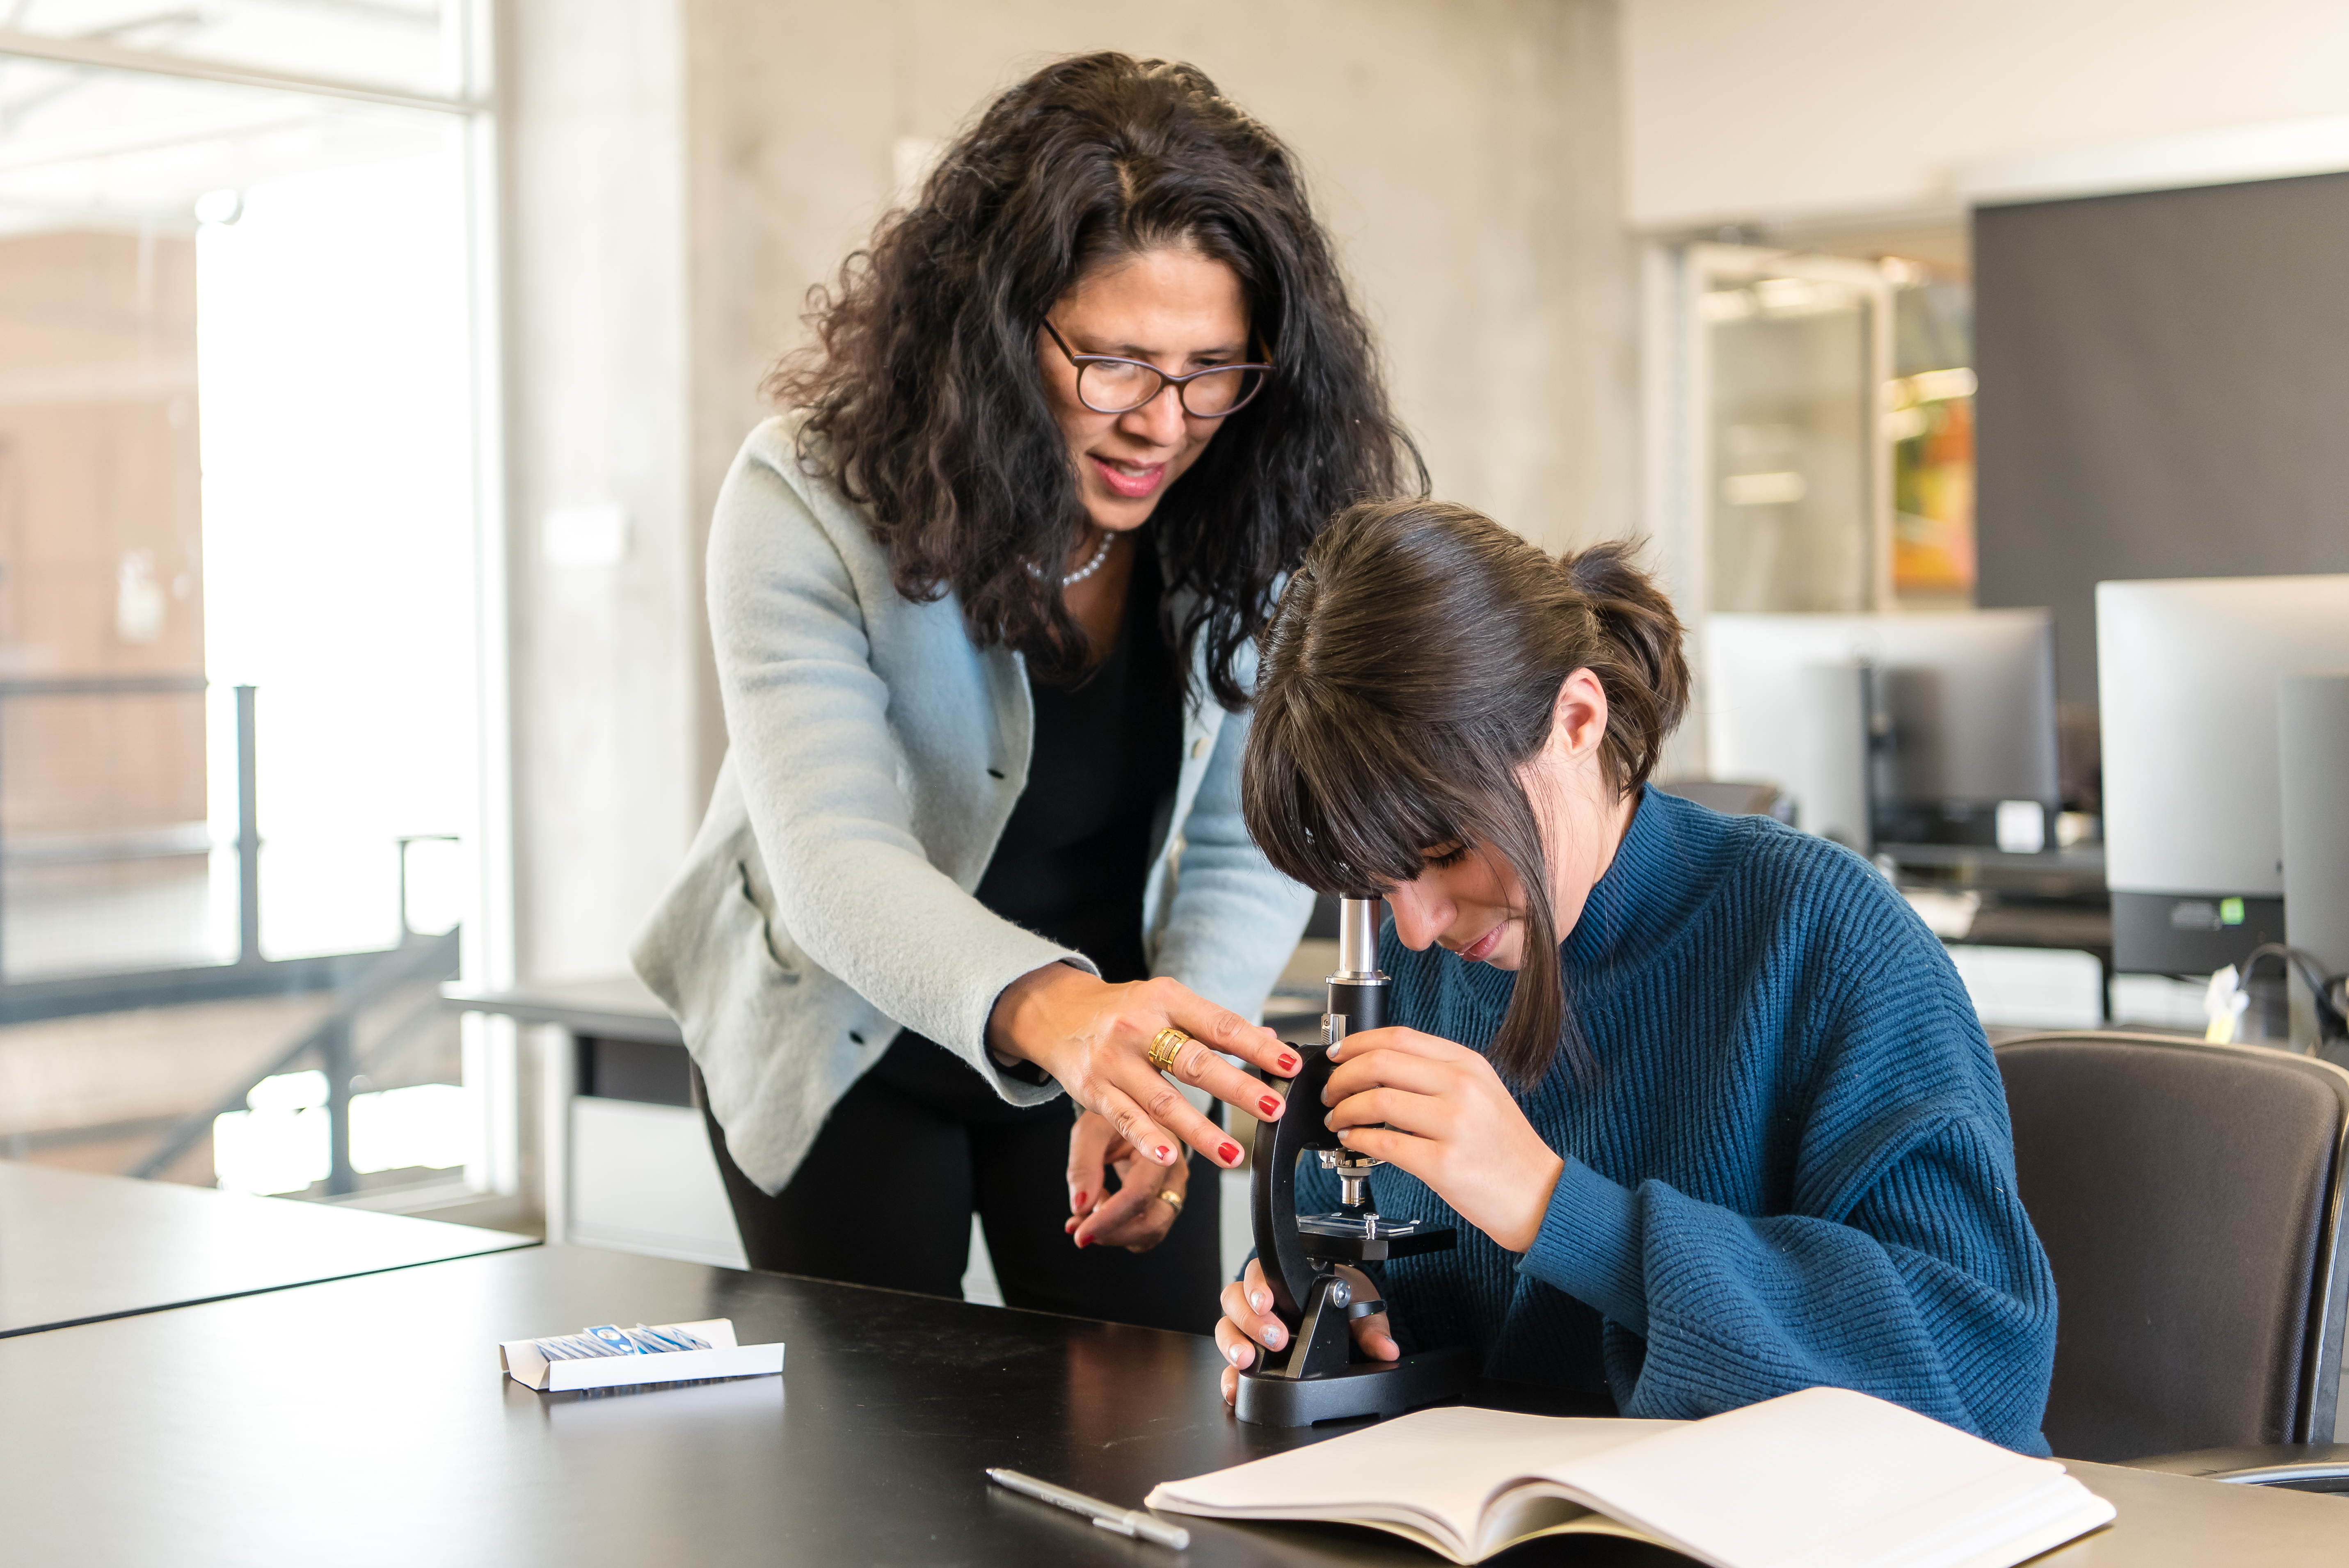 A student looks into a microscope; a teacher stands next to her